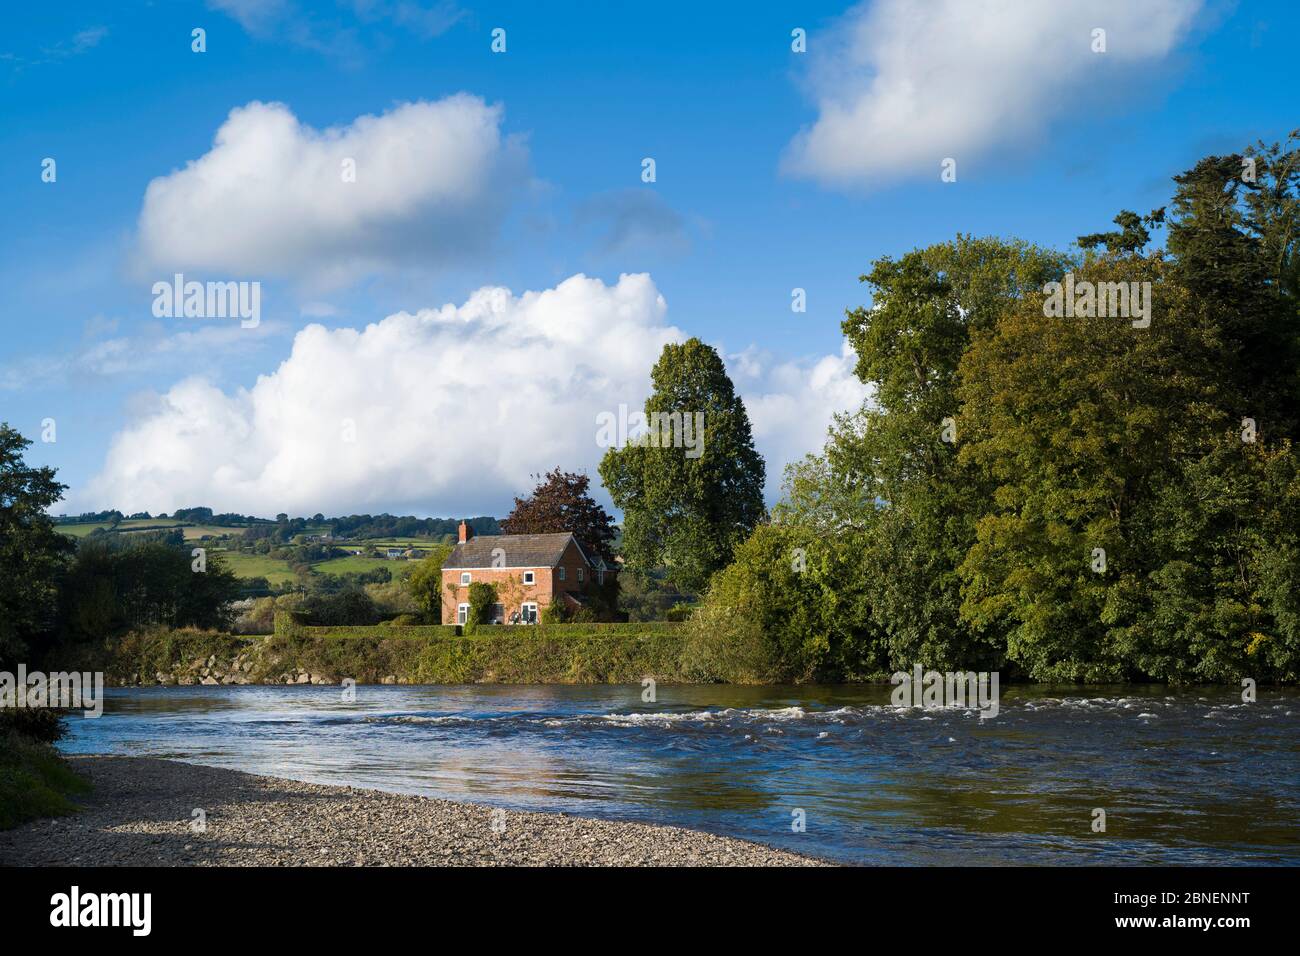 Riverside home in typical Welsh landscape by the River Wye in the Brecon Beacons in Wales, UK Stock Photo